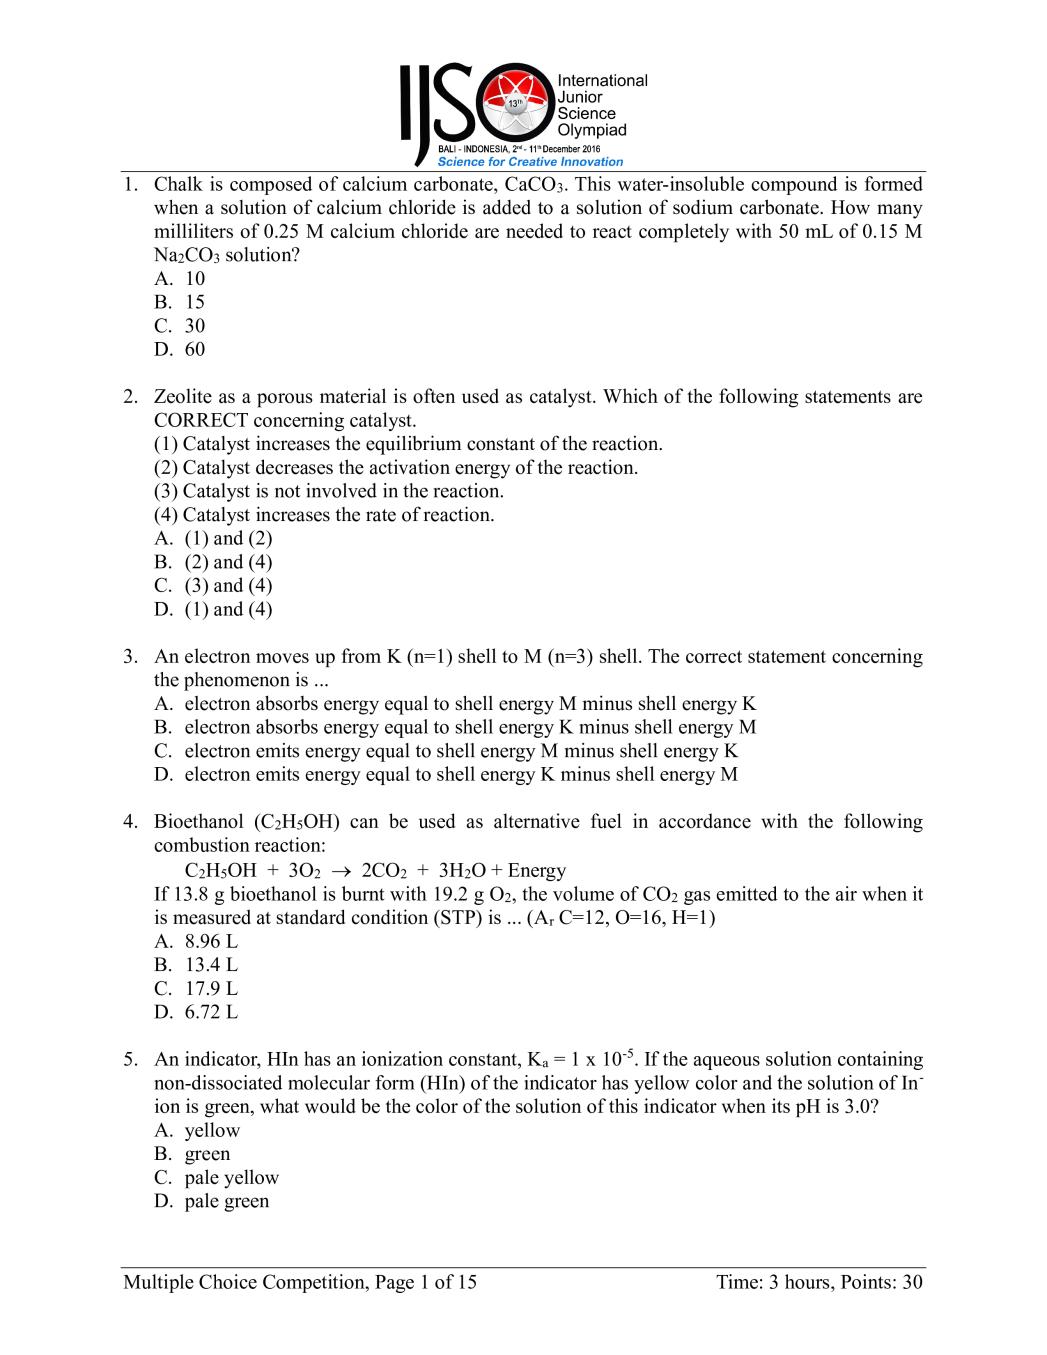 IJSO 2016 MCQ Question Paper, Answer Sheet and Solutions - Page 1